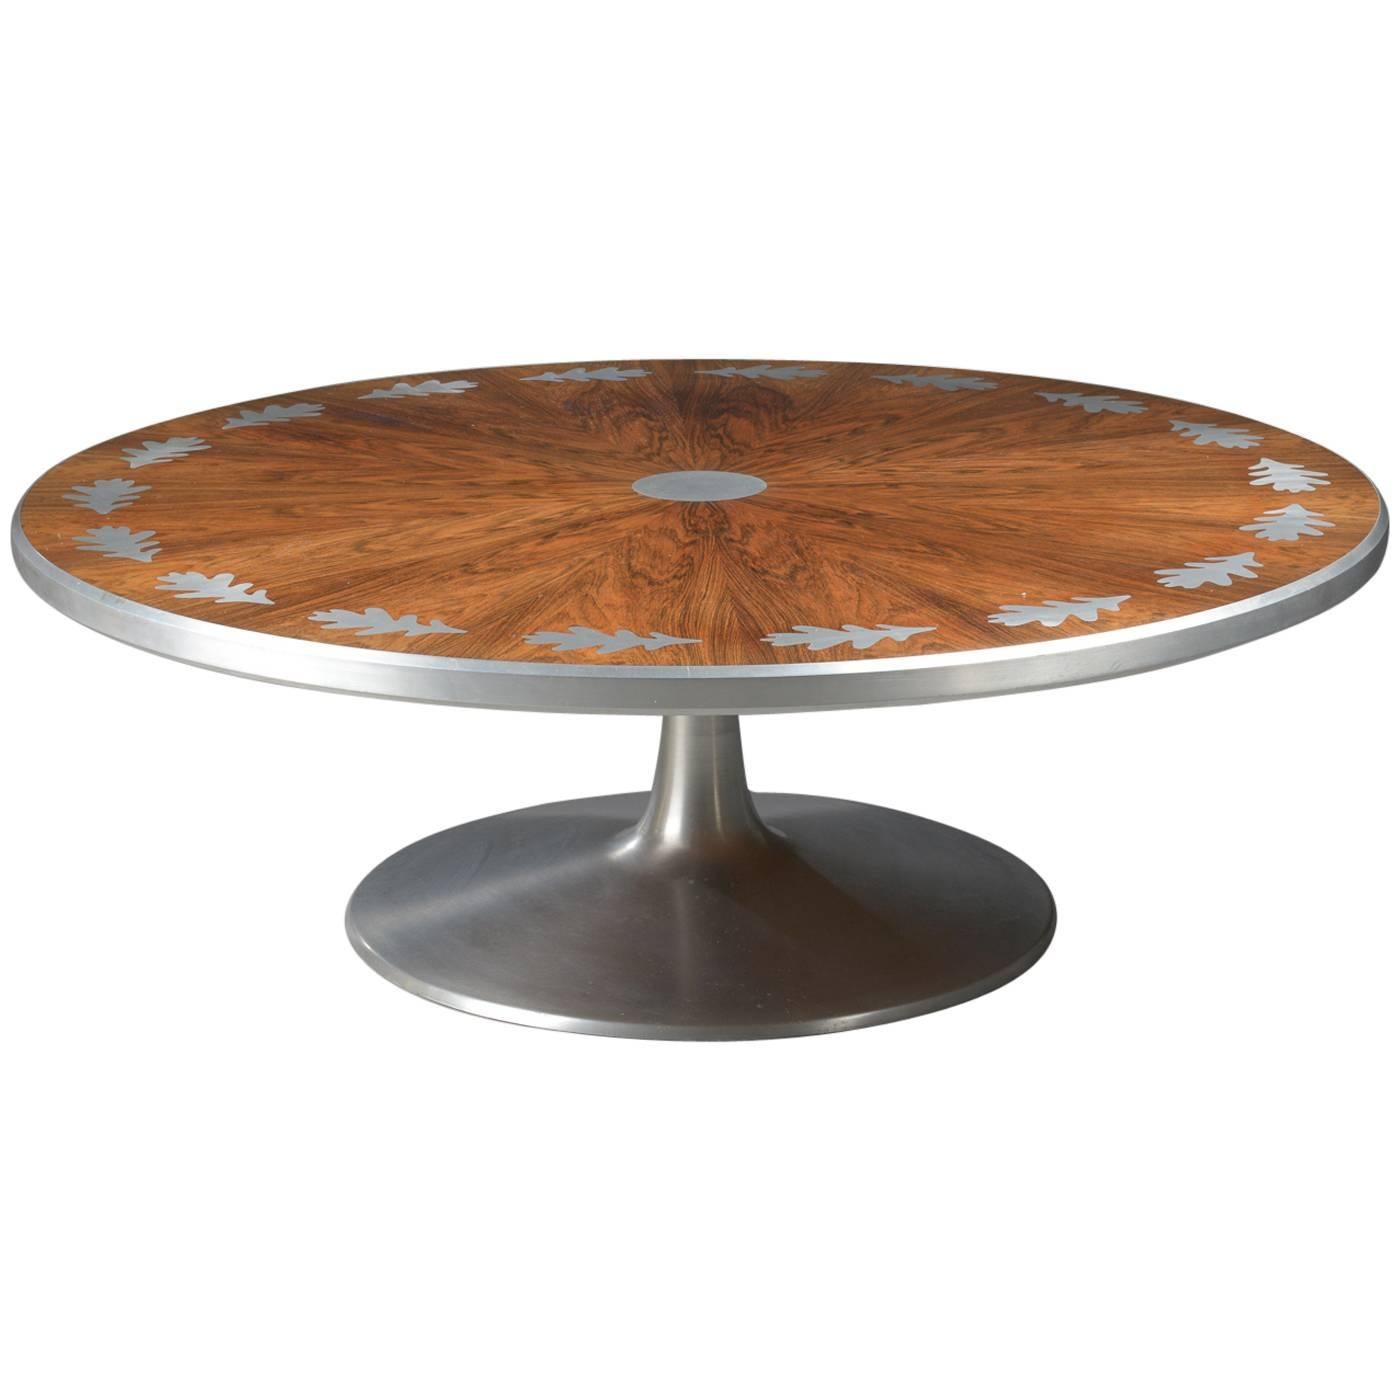 Absolutely stunning circular rosewood coffee table designed by Danish designer Poul Cadovius. Unique leaf inlay design in steel. Aluminum lipping middle and trumpet base. Produced by Cado.